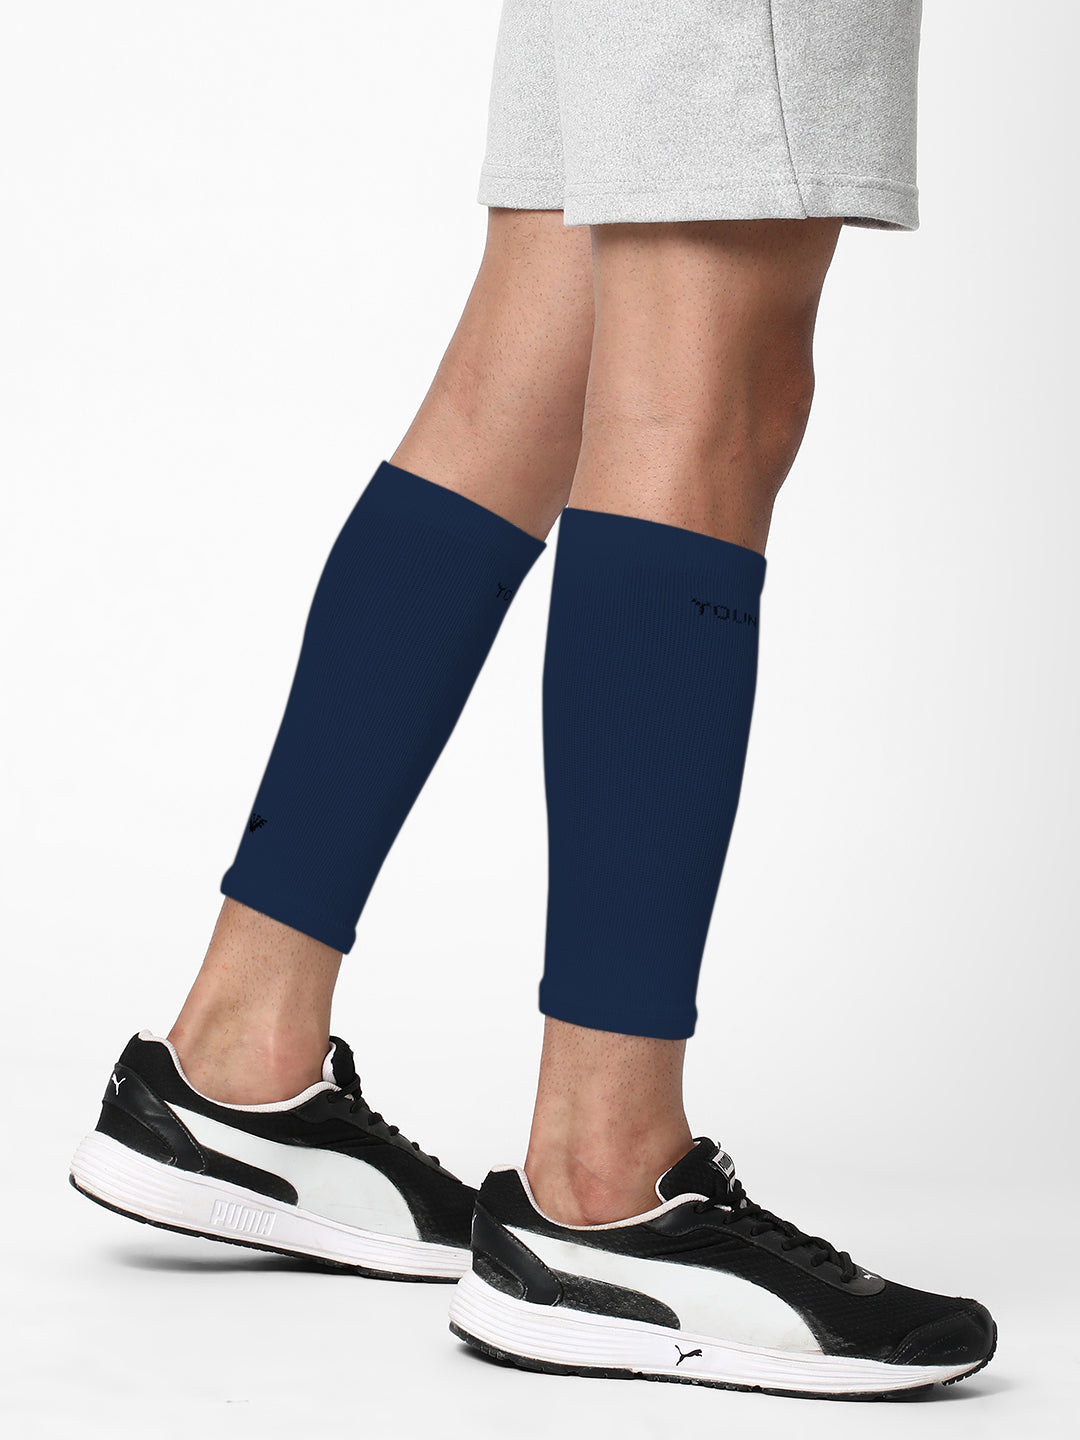 Young Wings Antibacterial Bamboo Fabric Calf Compression Sleeves for Unisex - Pack of 2 Pairs, Colour: Navy